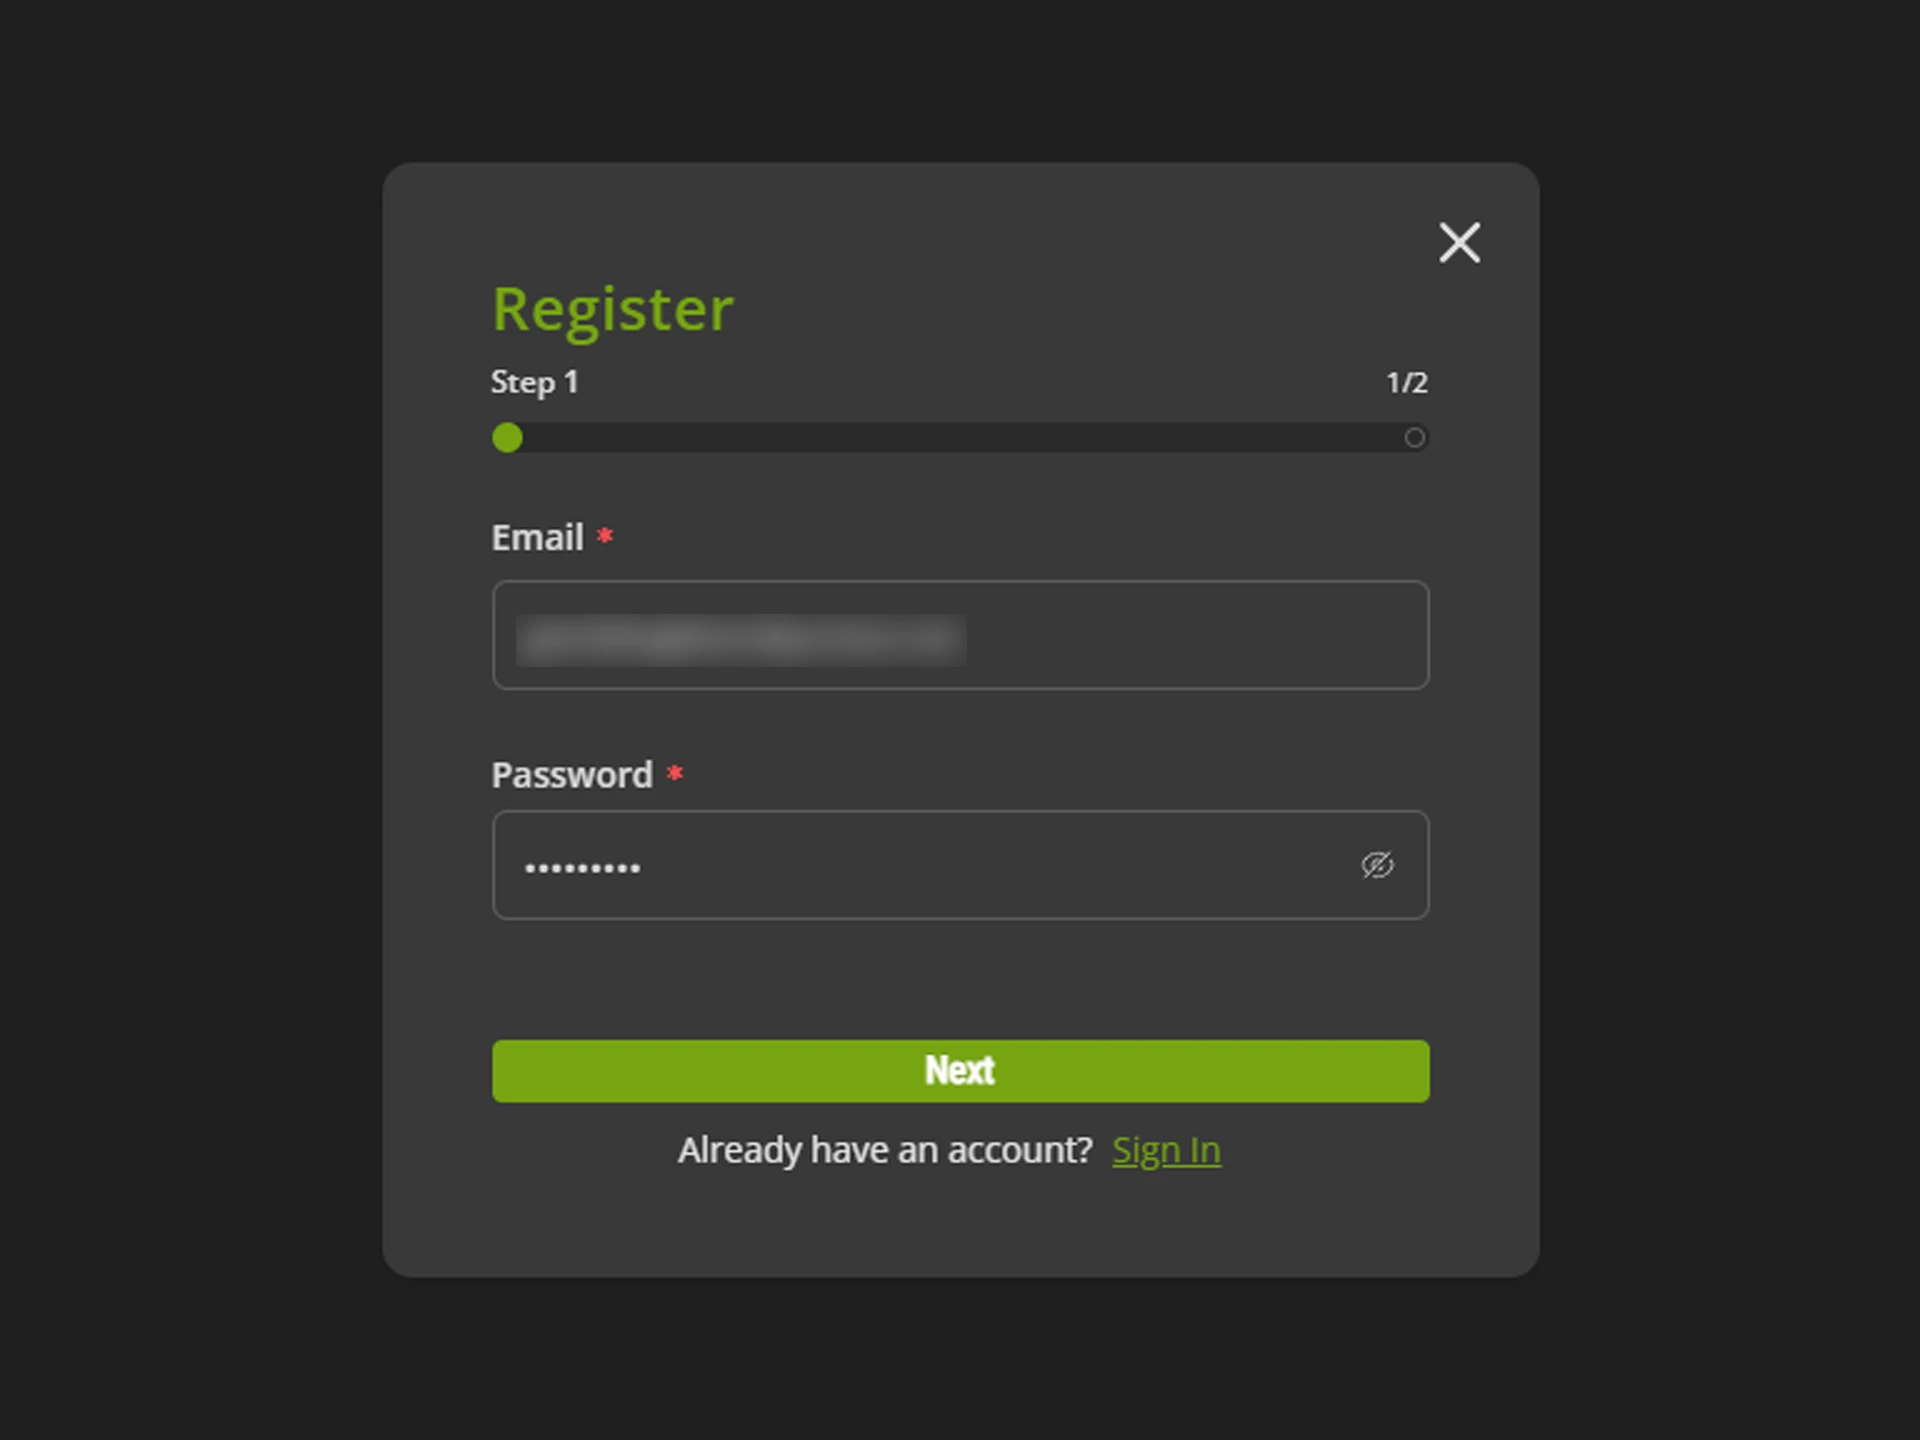 Enter your email address and password to continue registering on the Suprabets website.